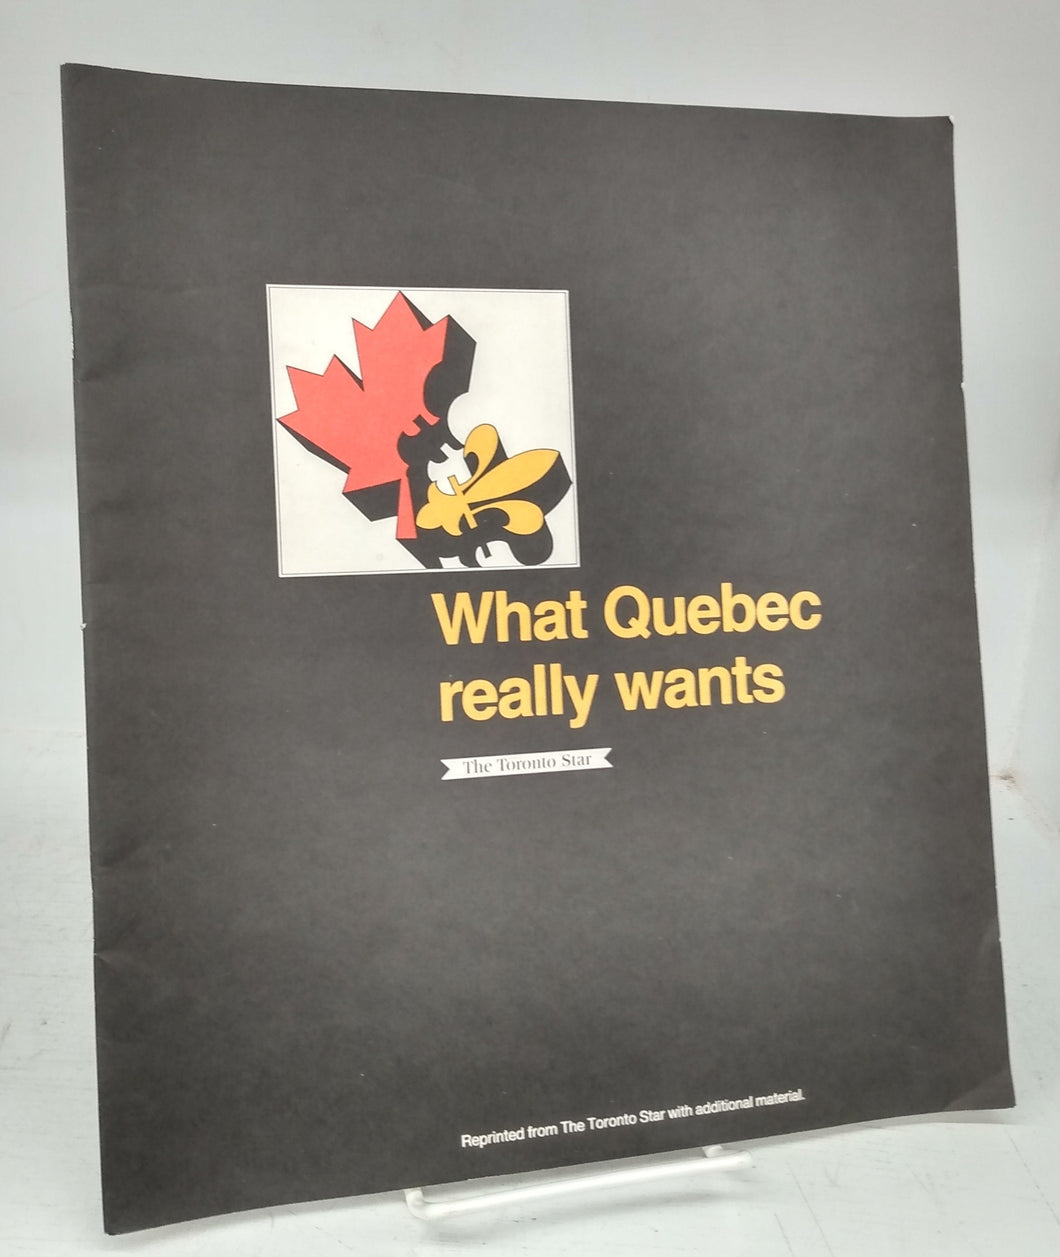 What Quebec really wants